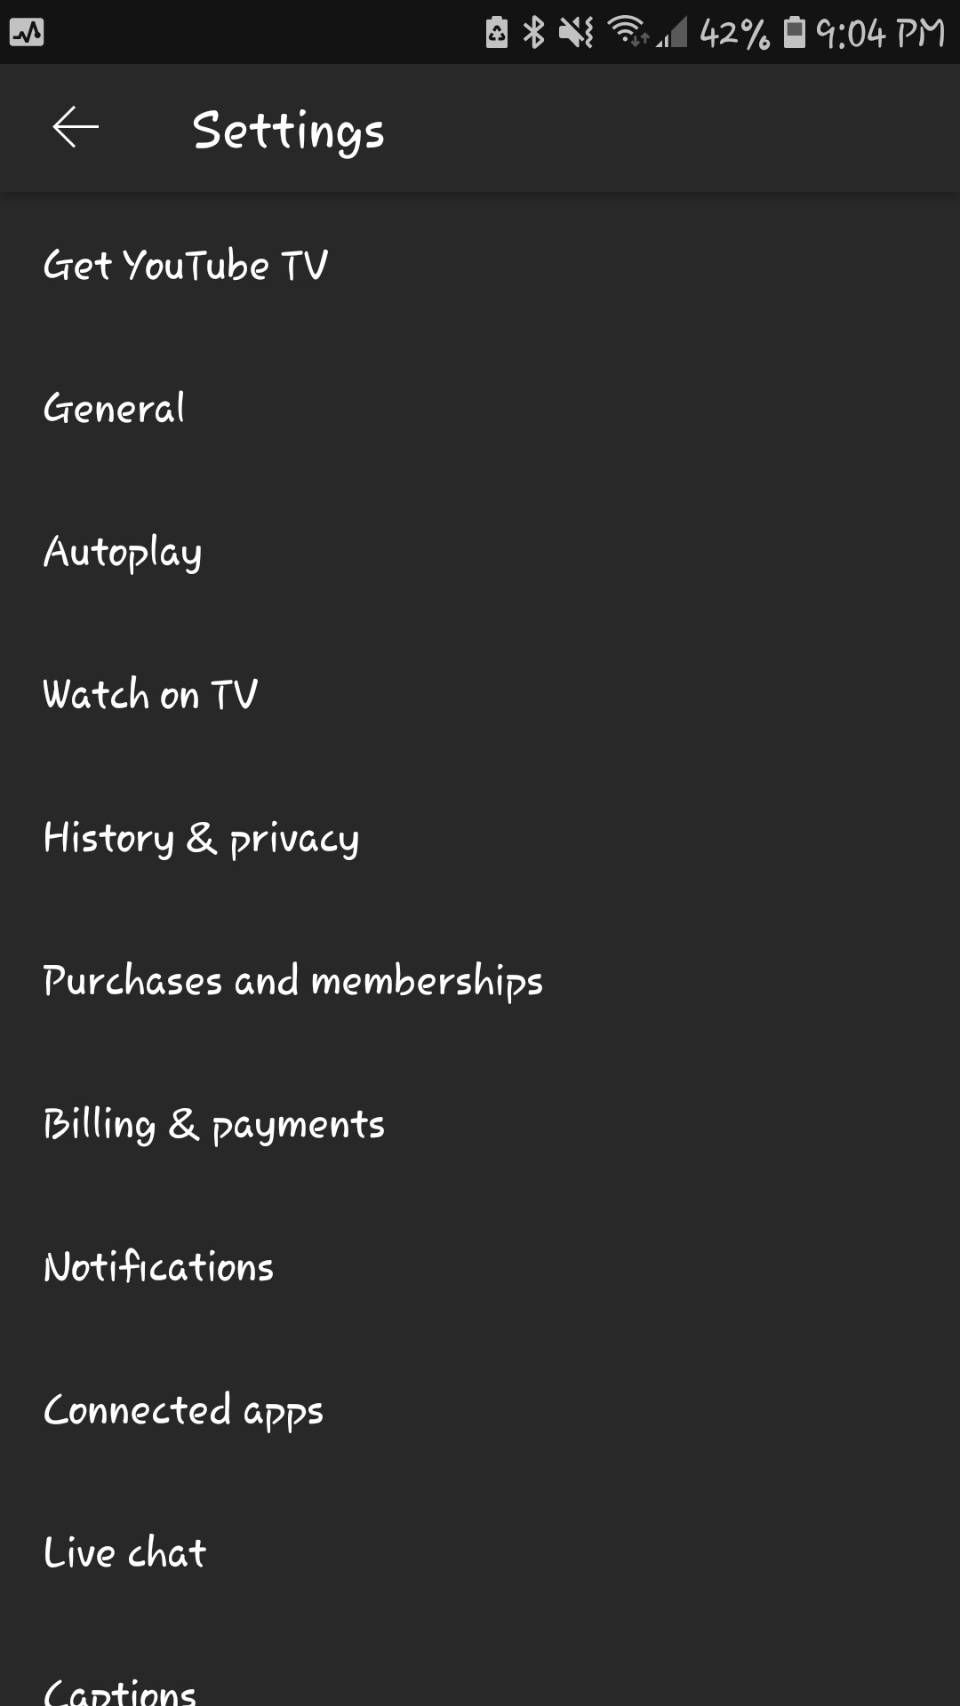 YouTube old settings android list